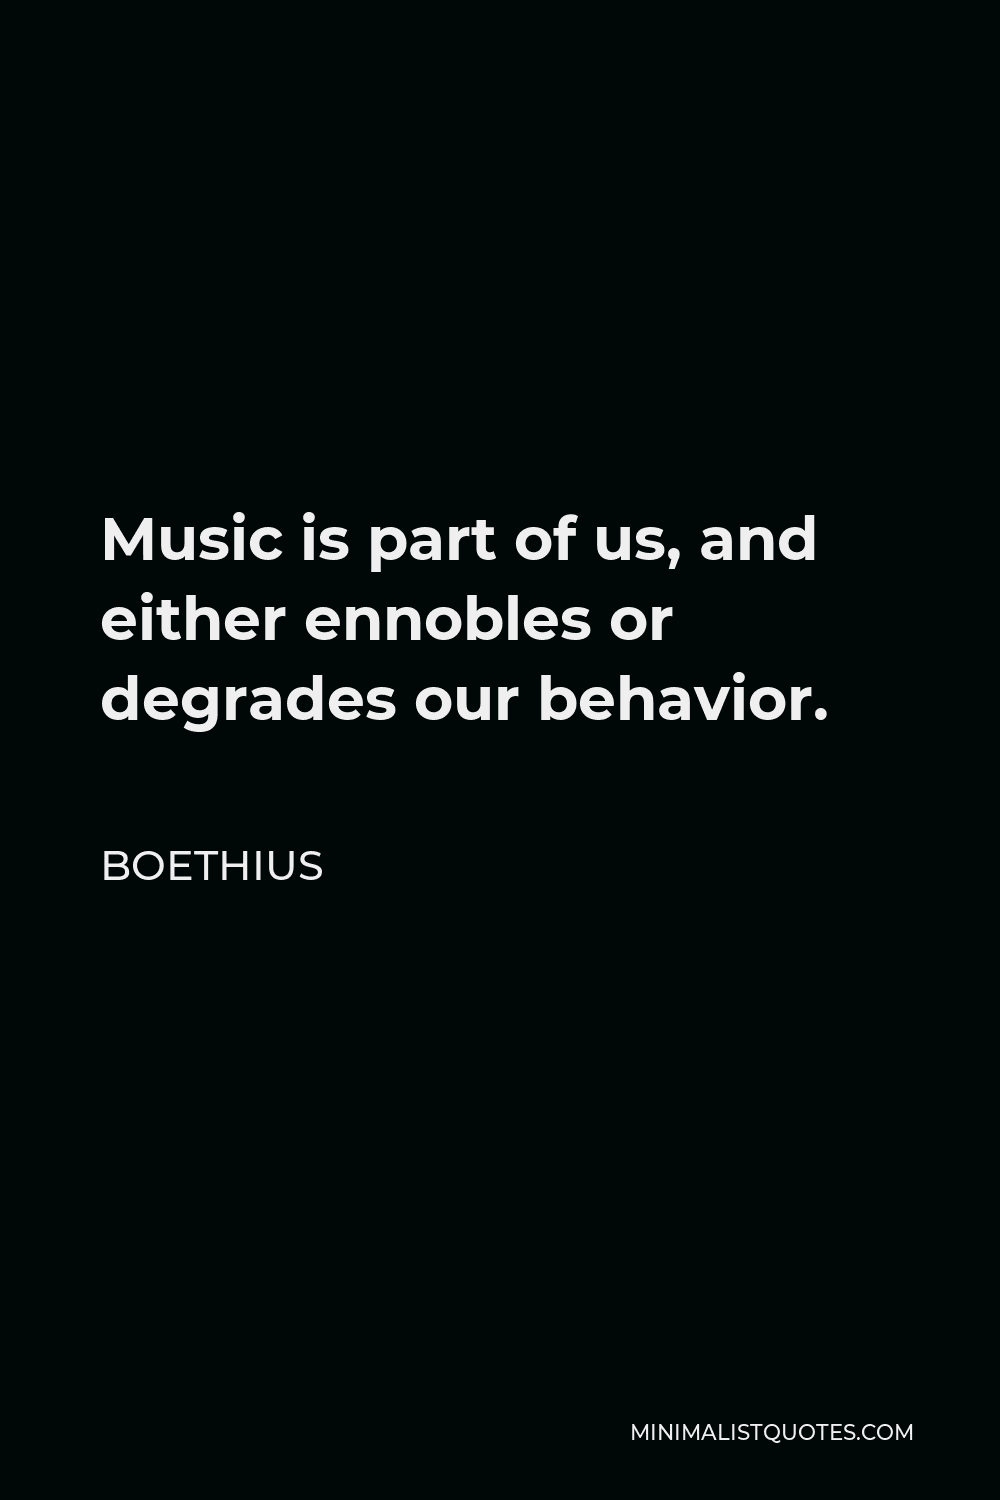 Boethius Quote - Music is part of us, and either ennobles or degrades our behavior.